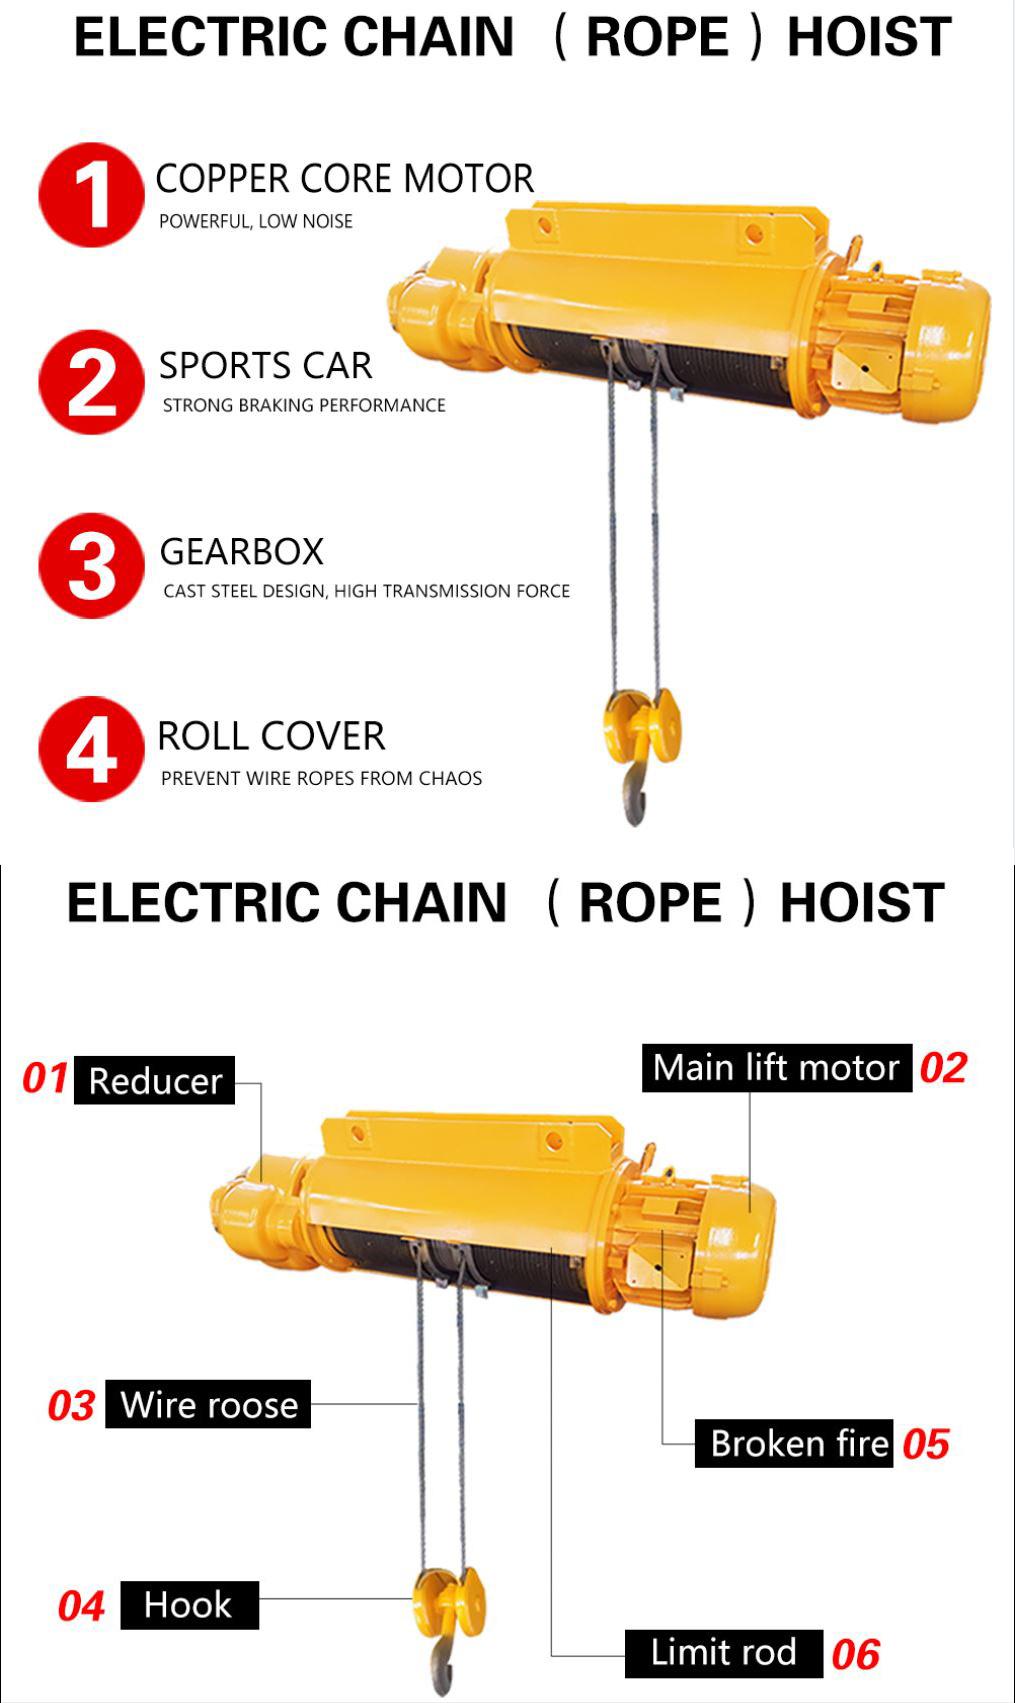 CD1 2ton Wire Rope Lifting Hoist with Electric Motor